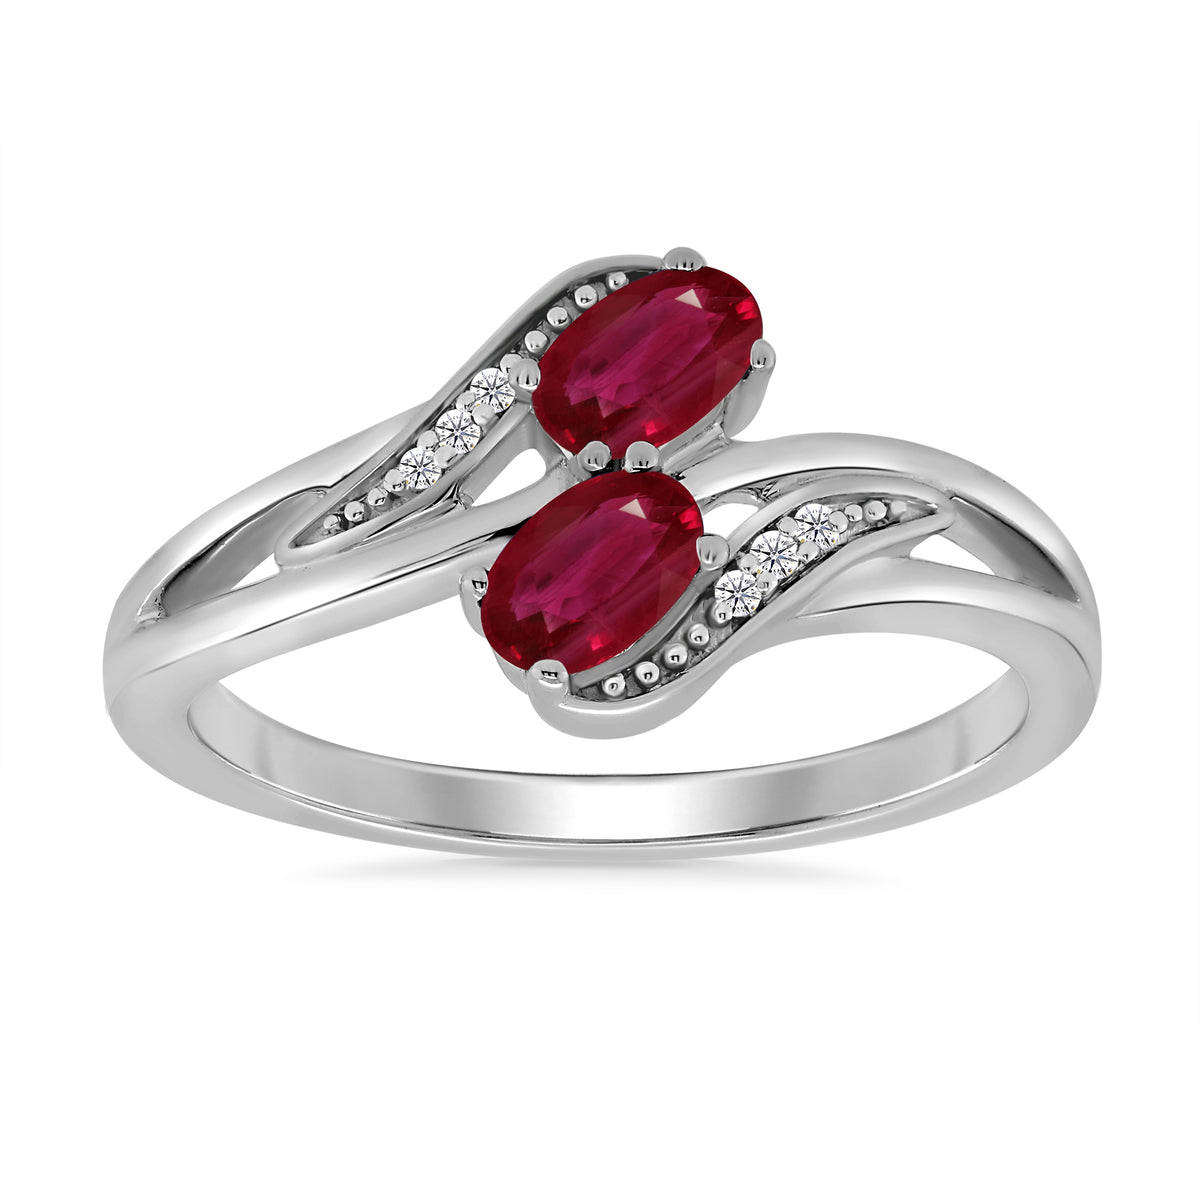 9ct white gold 5x3mm oval rubies &amp; diamond cross over ring 0.02ct